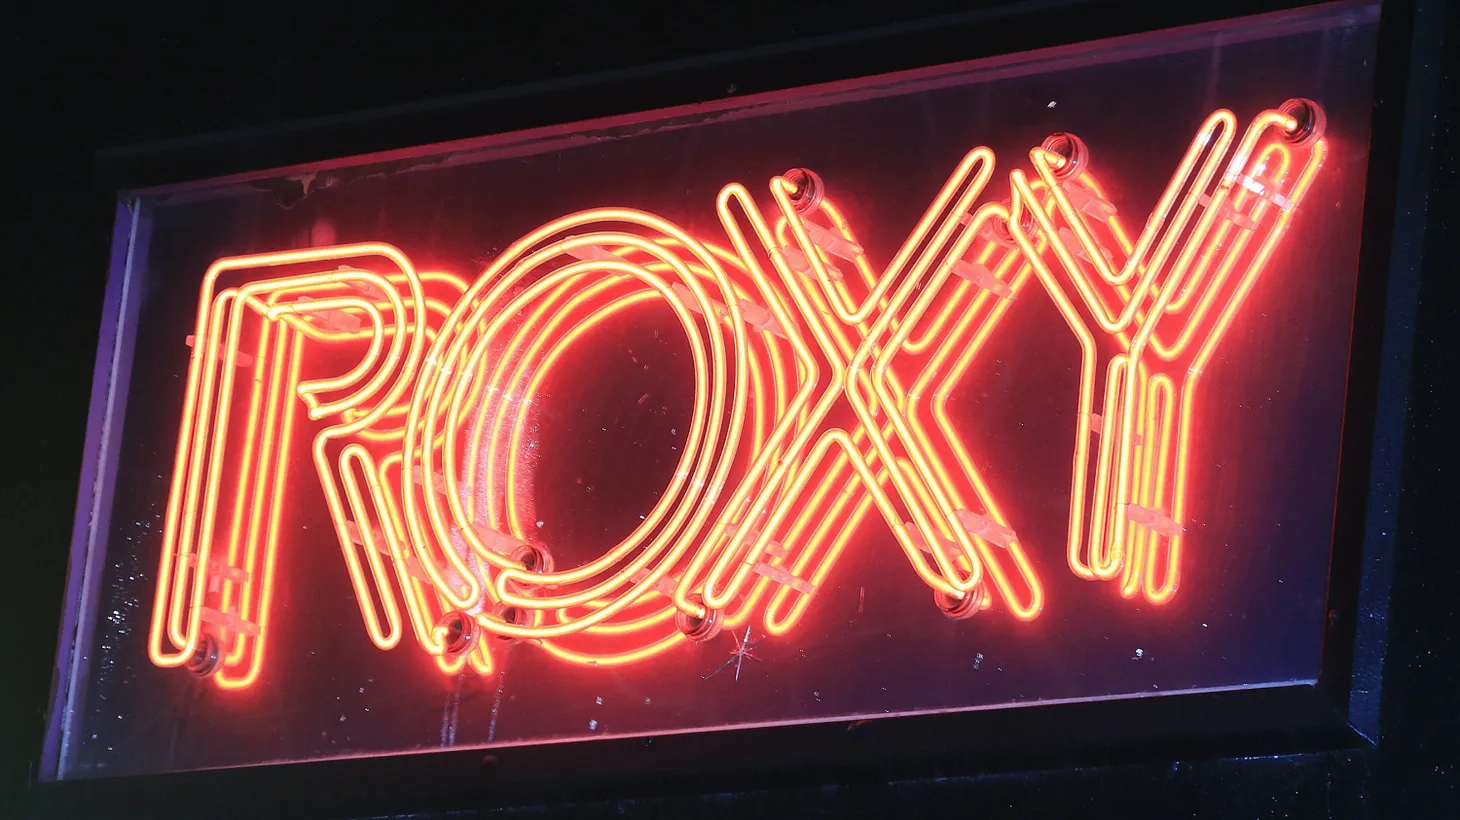 The Roxy Theatre is known for hosting some of the biggest names in the music industry.